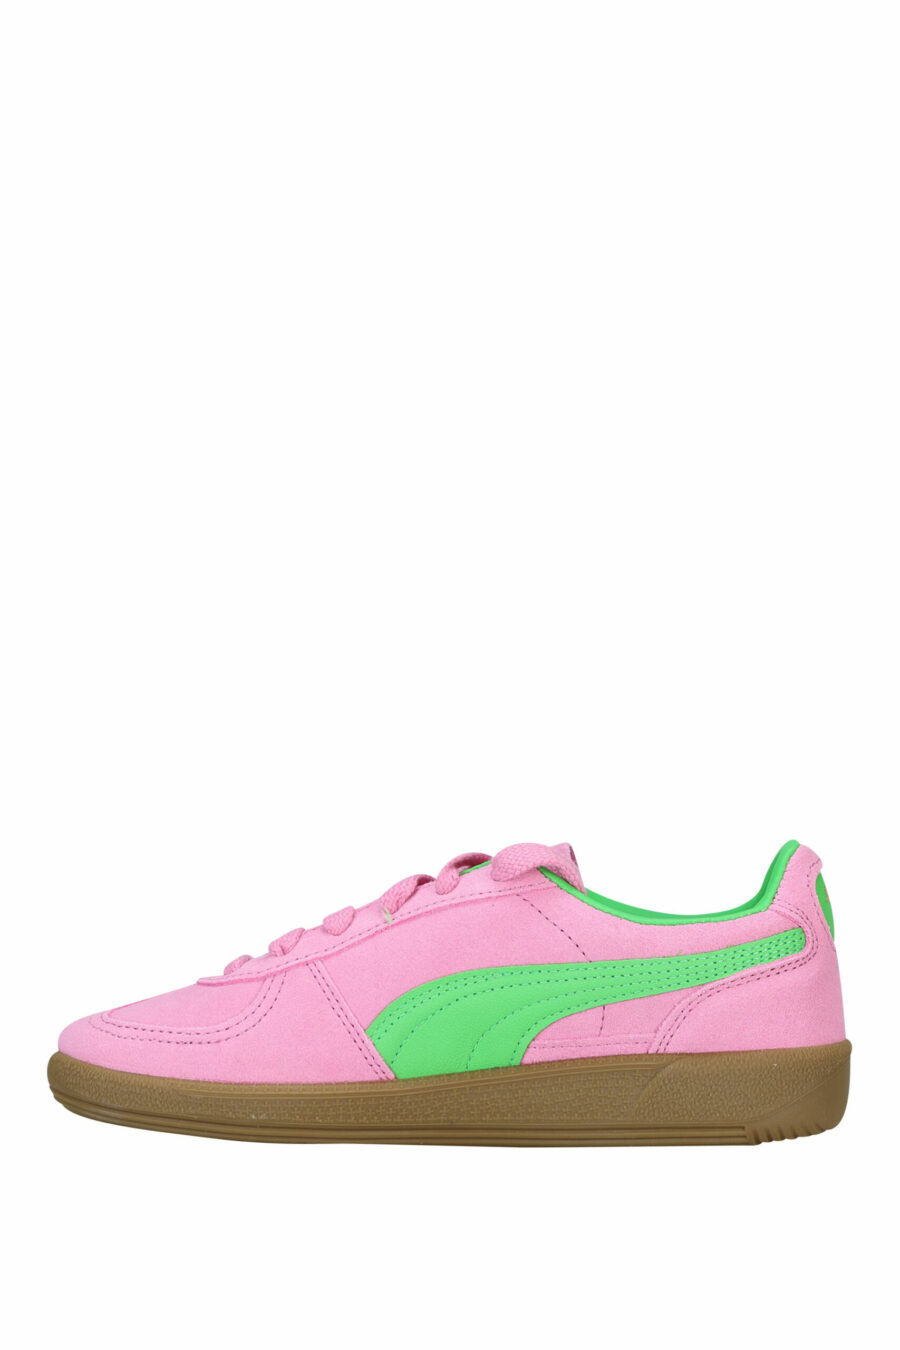 Trainers "palermo" fuchsia with green - 4099685699247 2 scaled